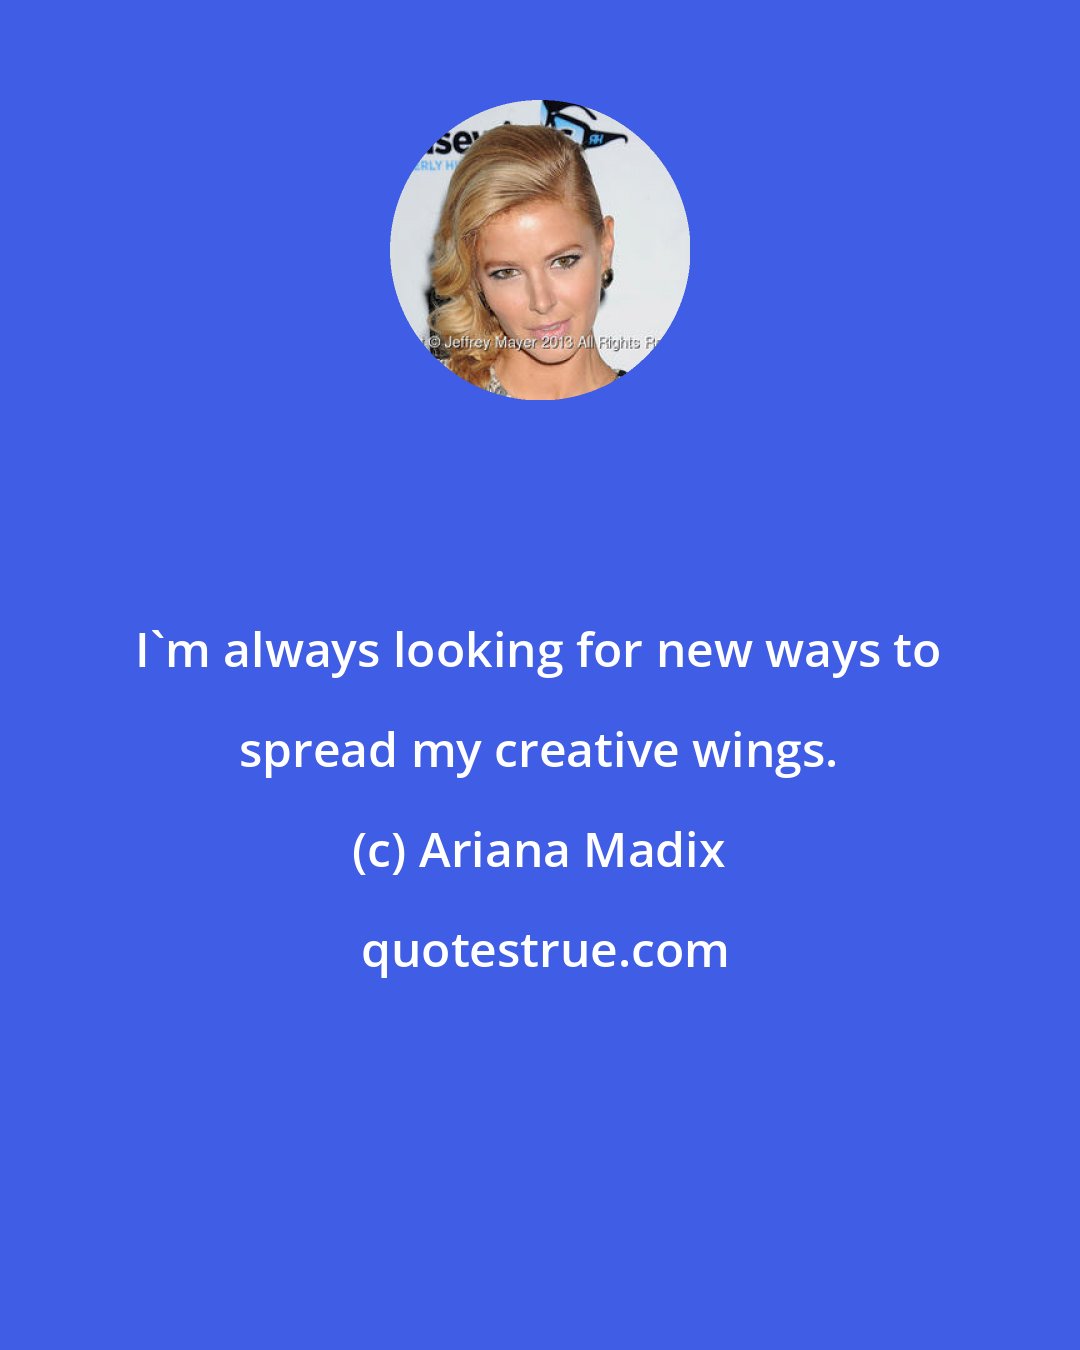 Ariana Madix: I'm always looking for new ways to spread my creative wings.